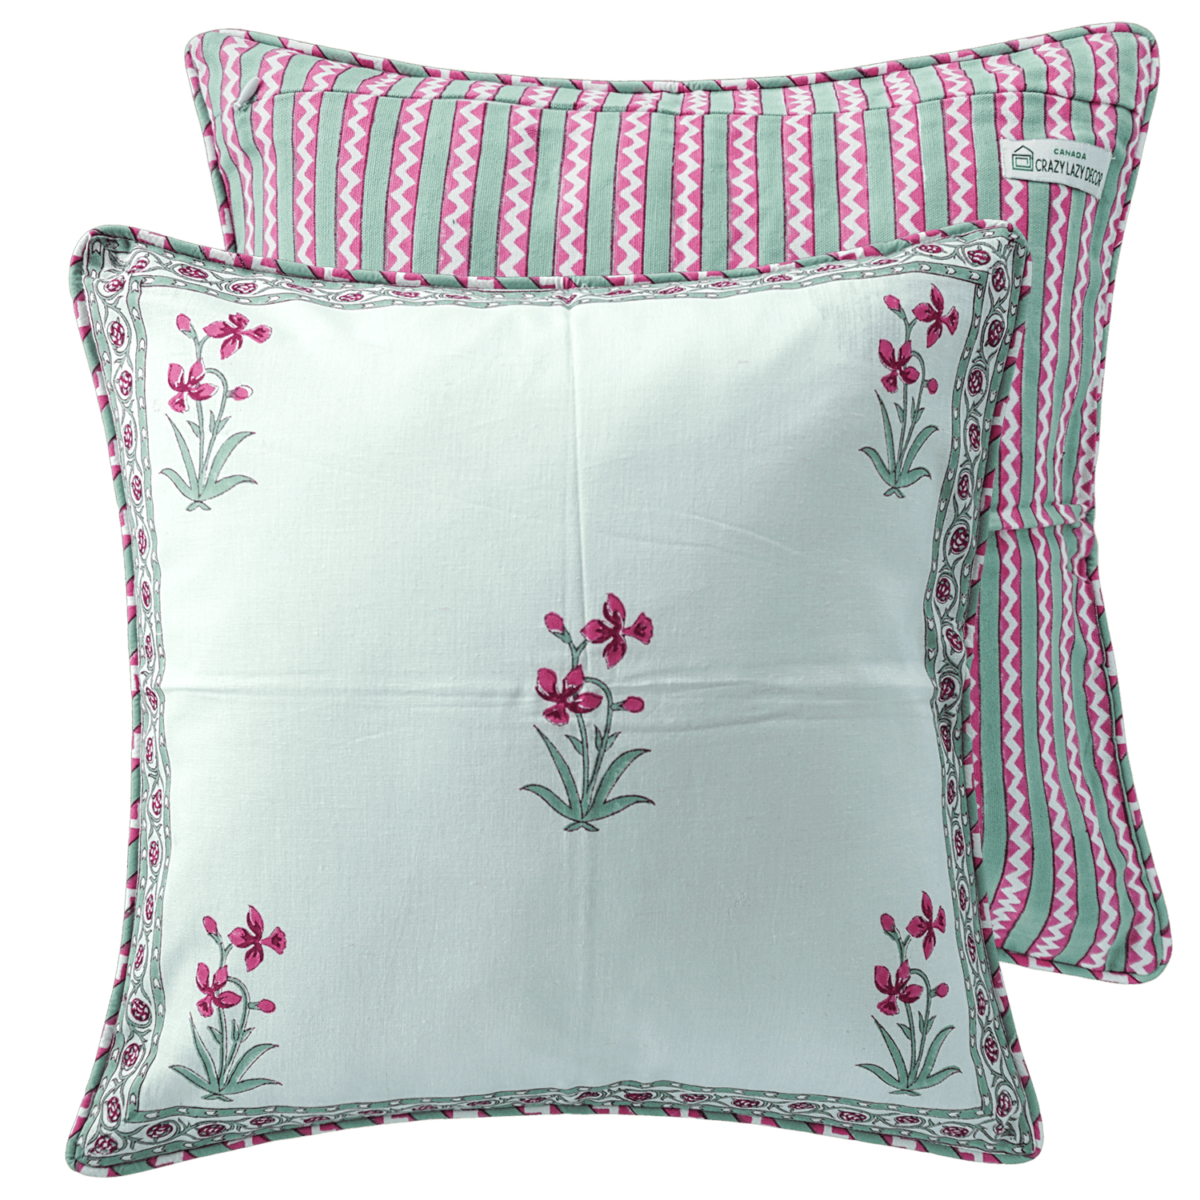 Summer flowers decorative pillow cover 18" X 18"